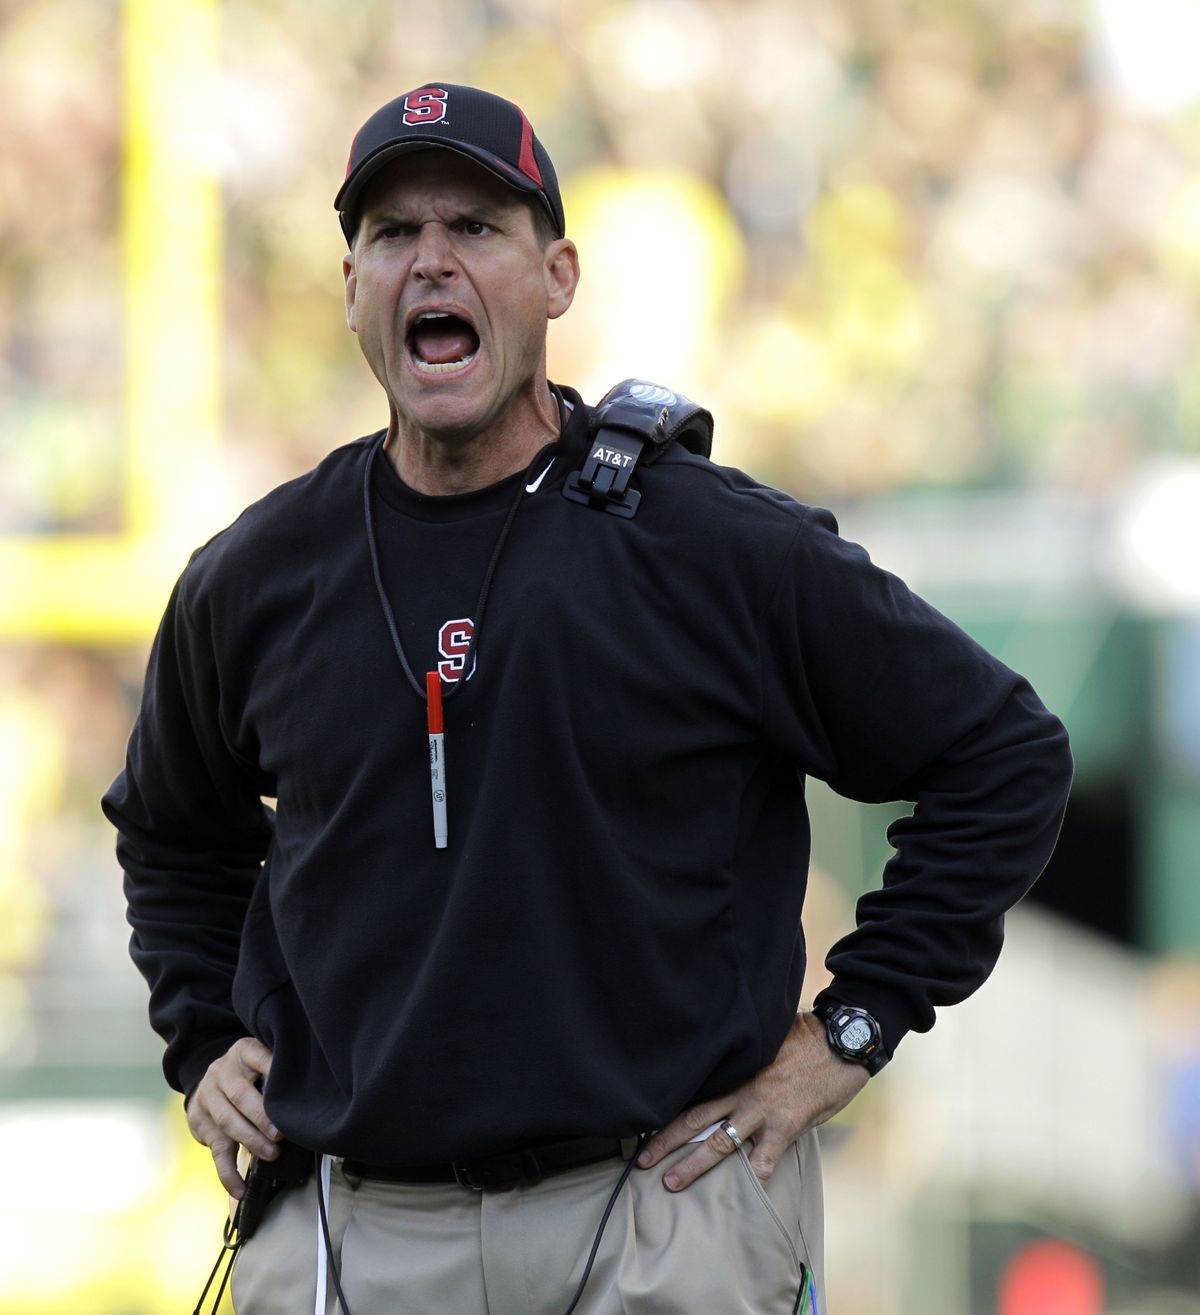 The rivalry between the 49ers’ Jim Harbaugh, above, the former Stanford coach, and Seattle’s Pete Carroll dates to their college days. (Associated Press)